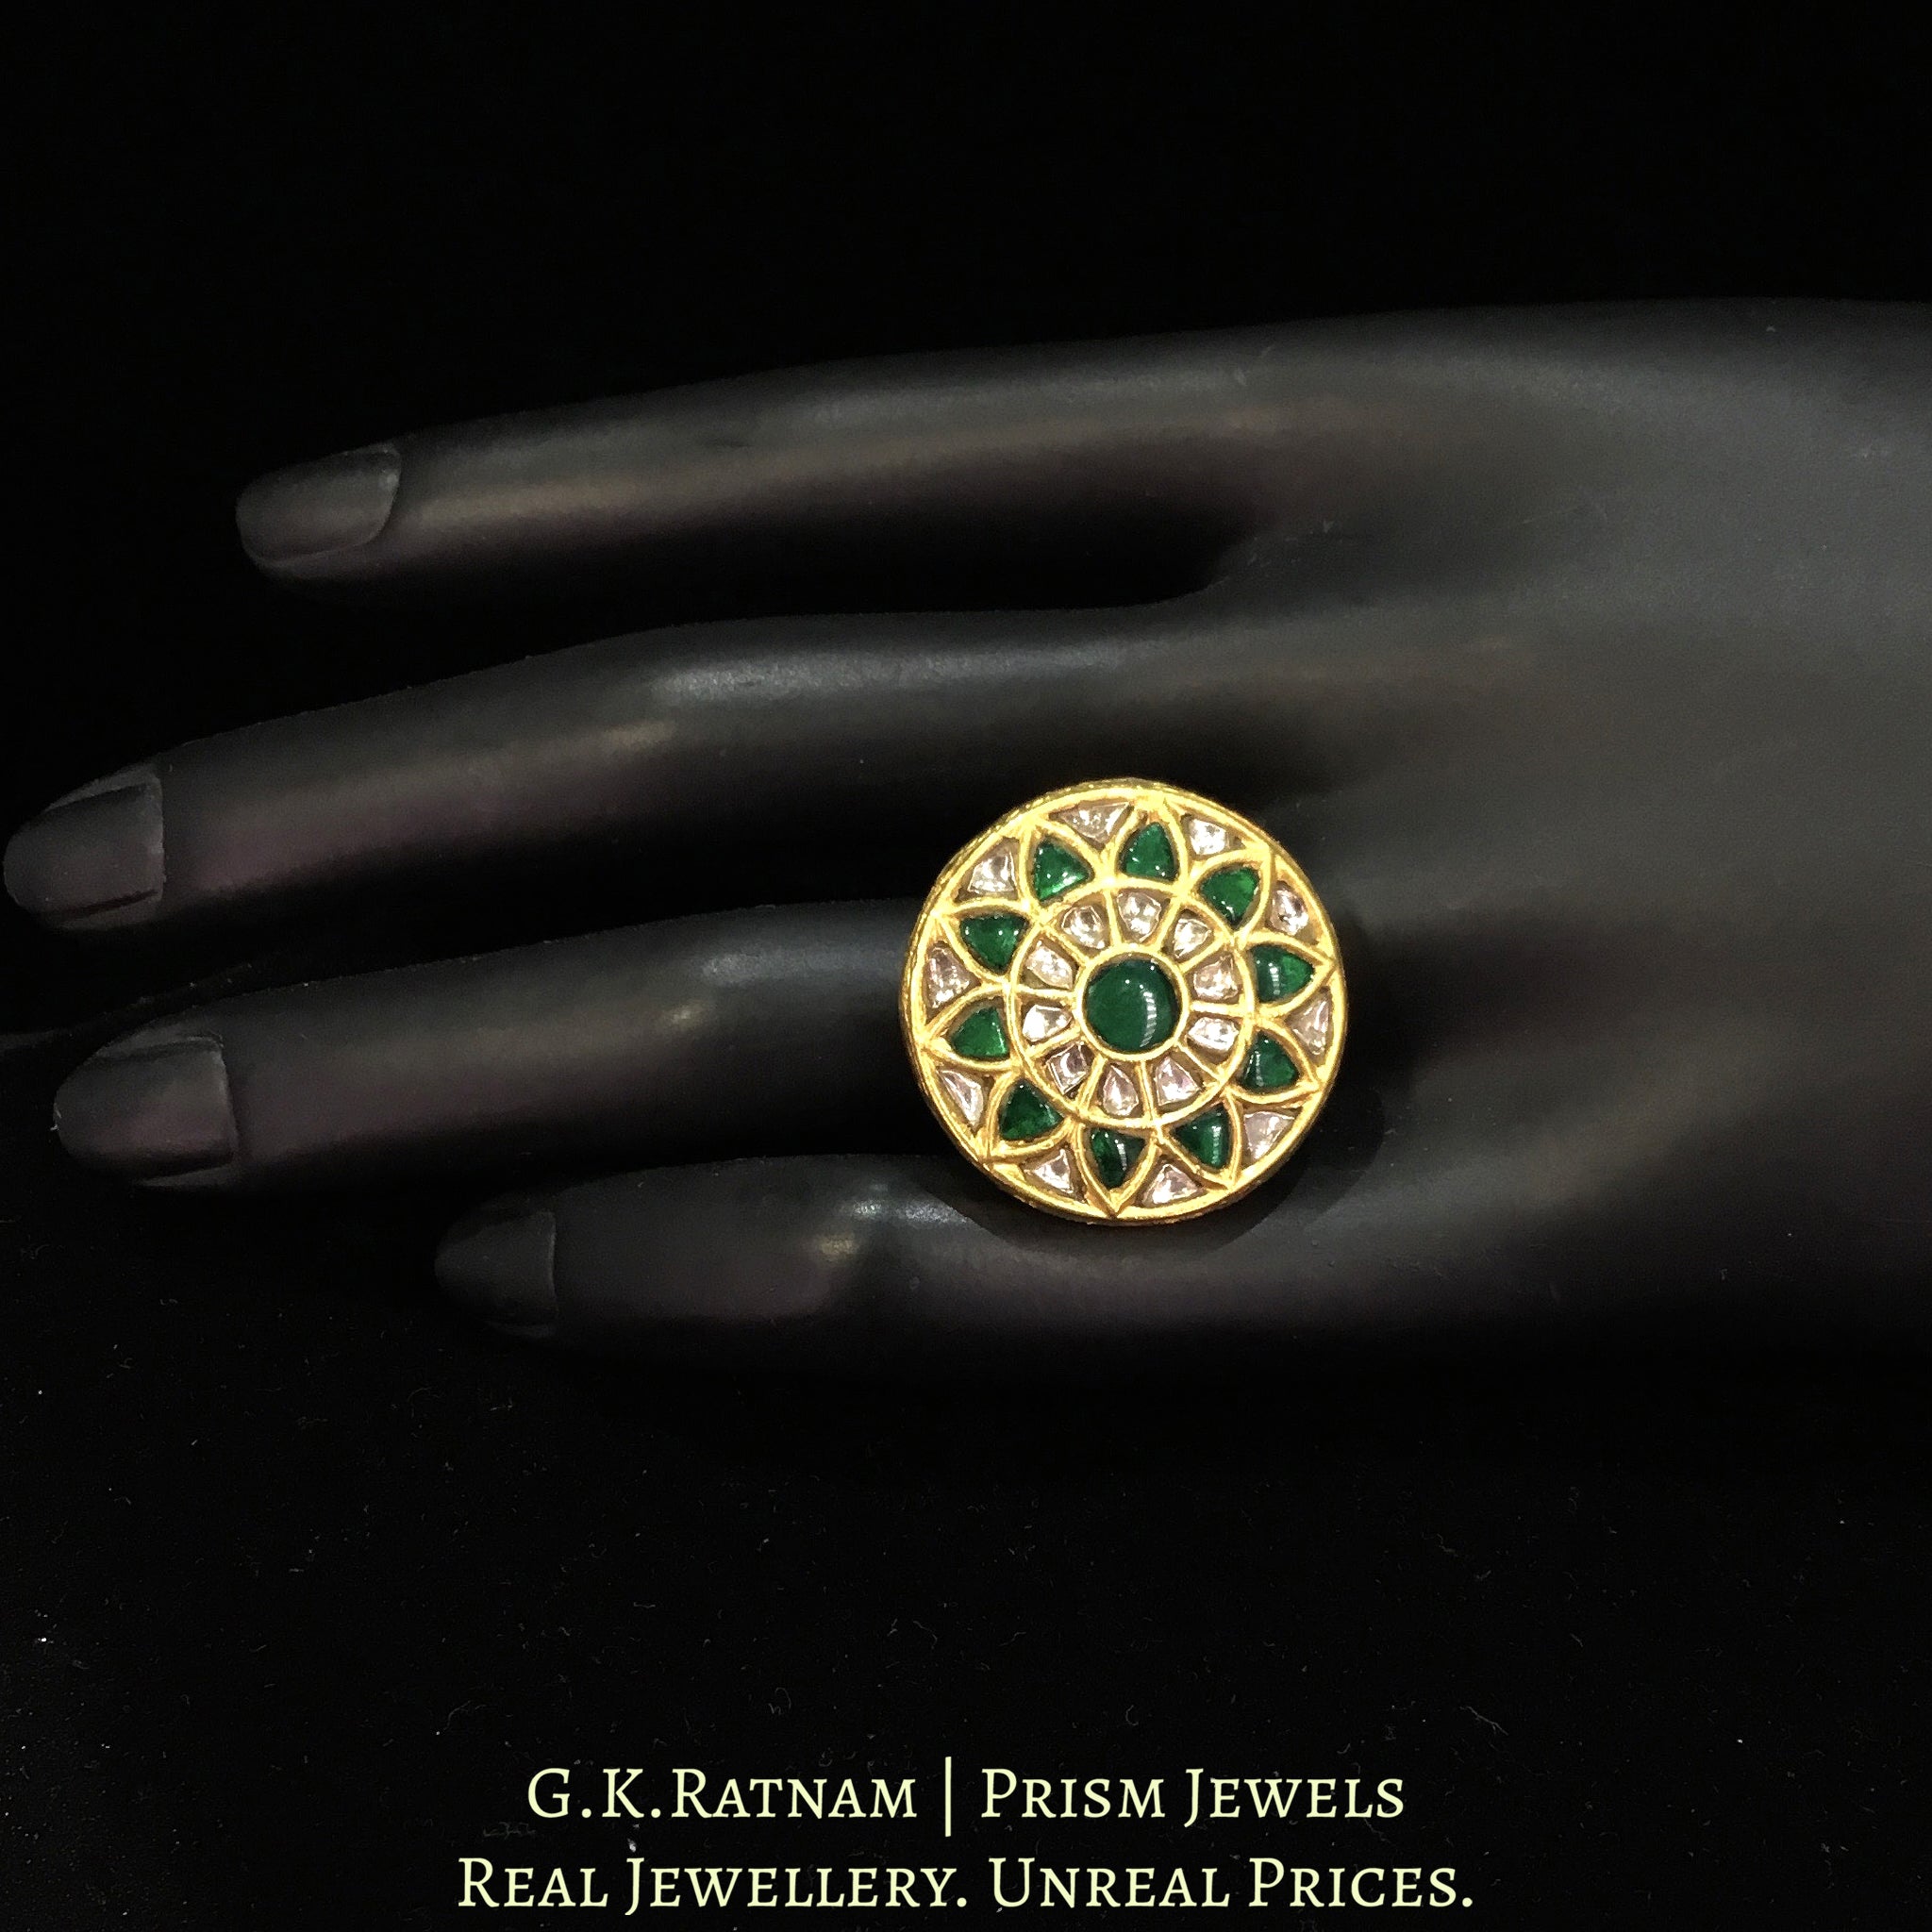 23k Gold and Diamond Polki Round Ring with emerald-grade Green Stones